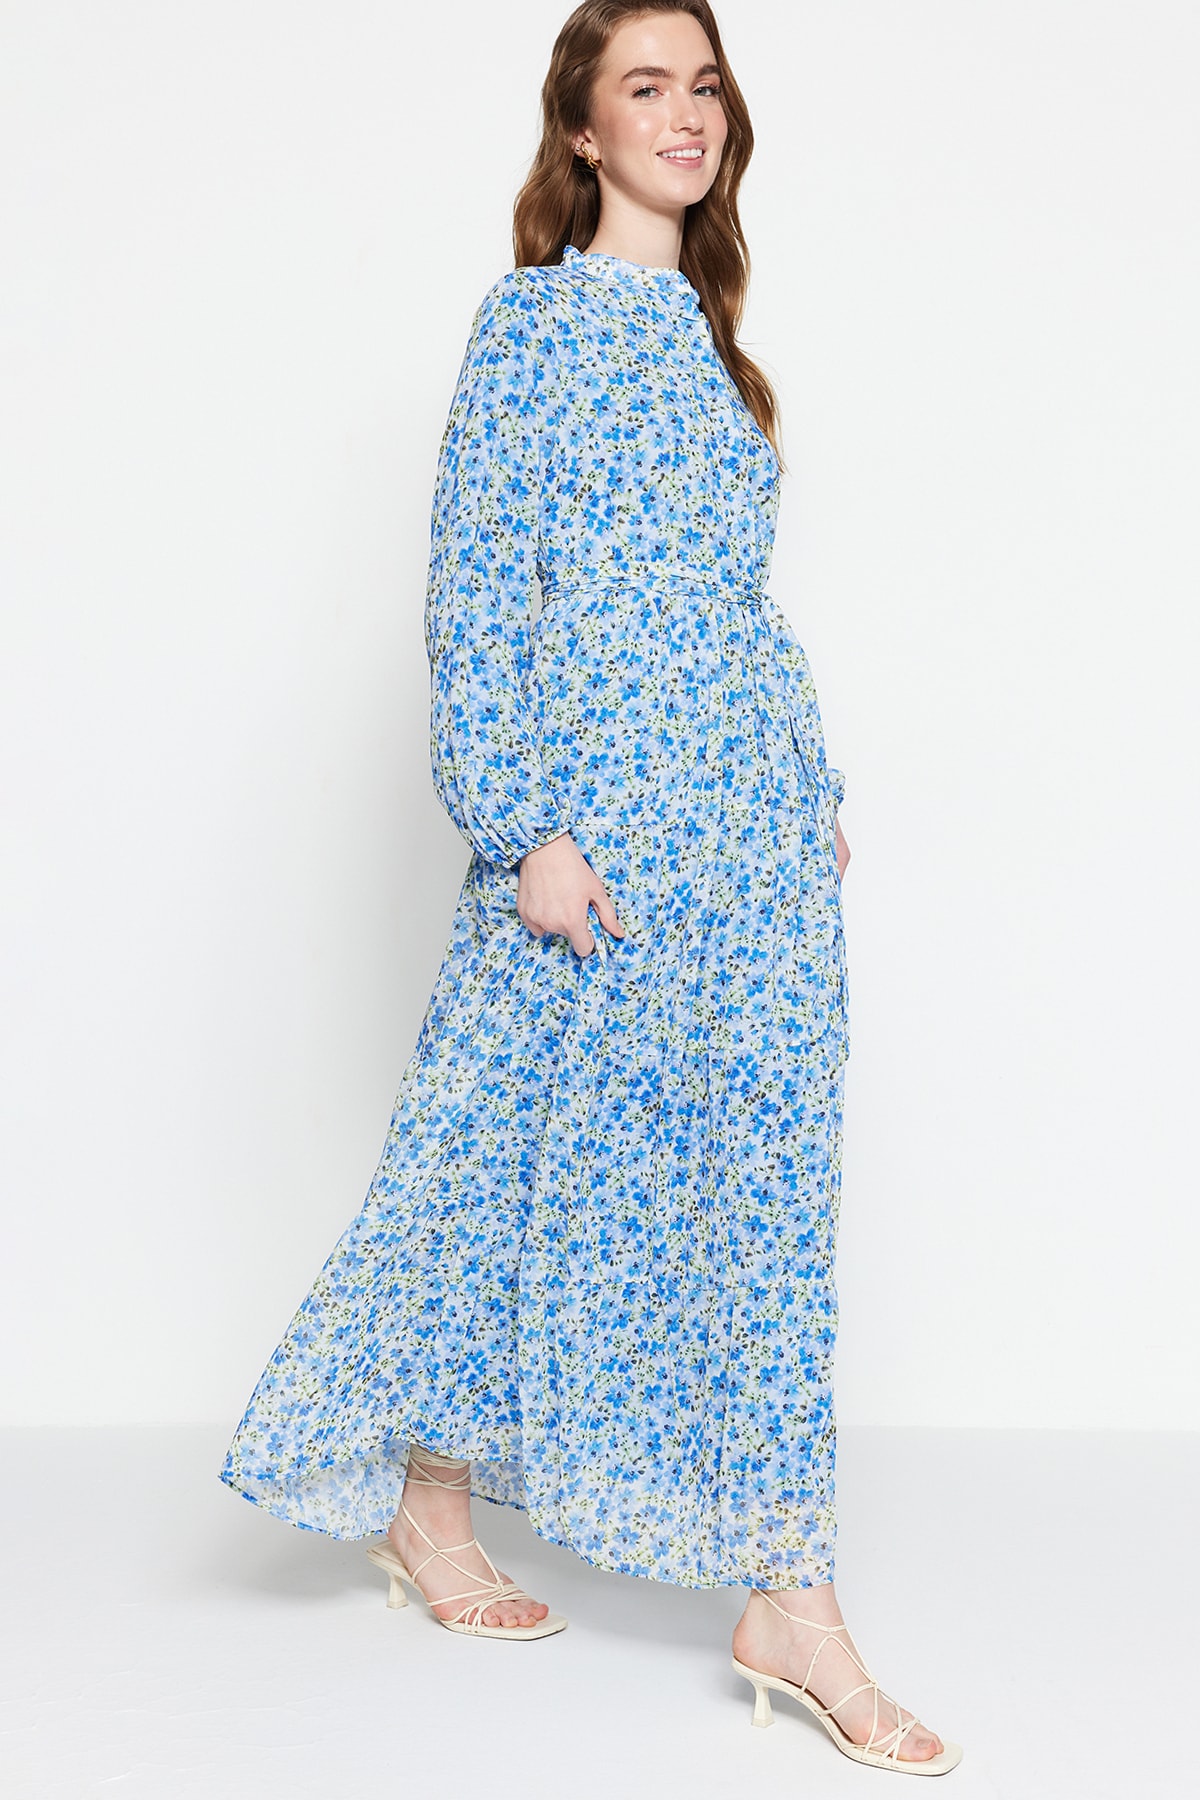 Trendyol Light Blue Floral Patterned Belted Stand Up Collar Lined Chiffon Woven Dress